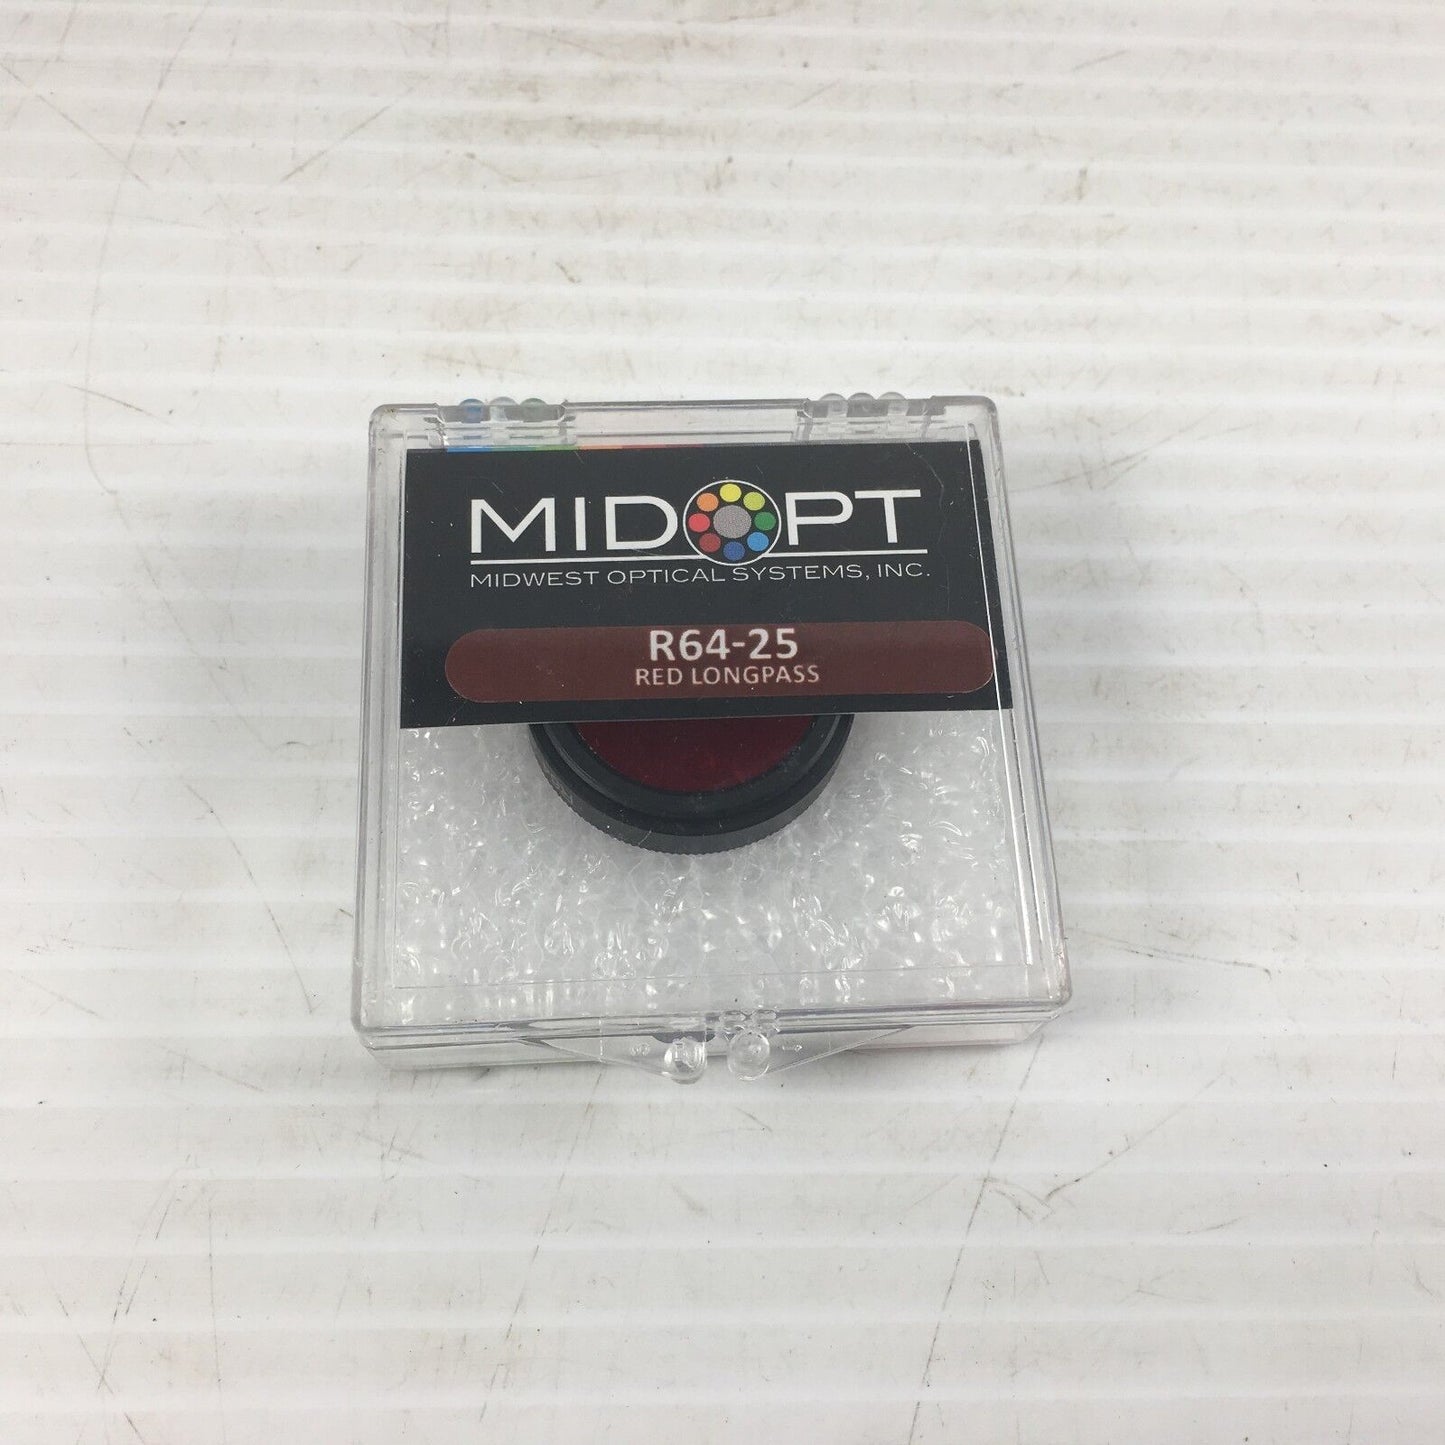 New Midwest Optical MIDOPT RED LONGPASS R64-25